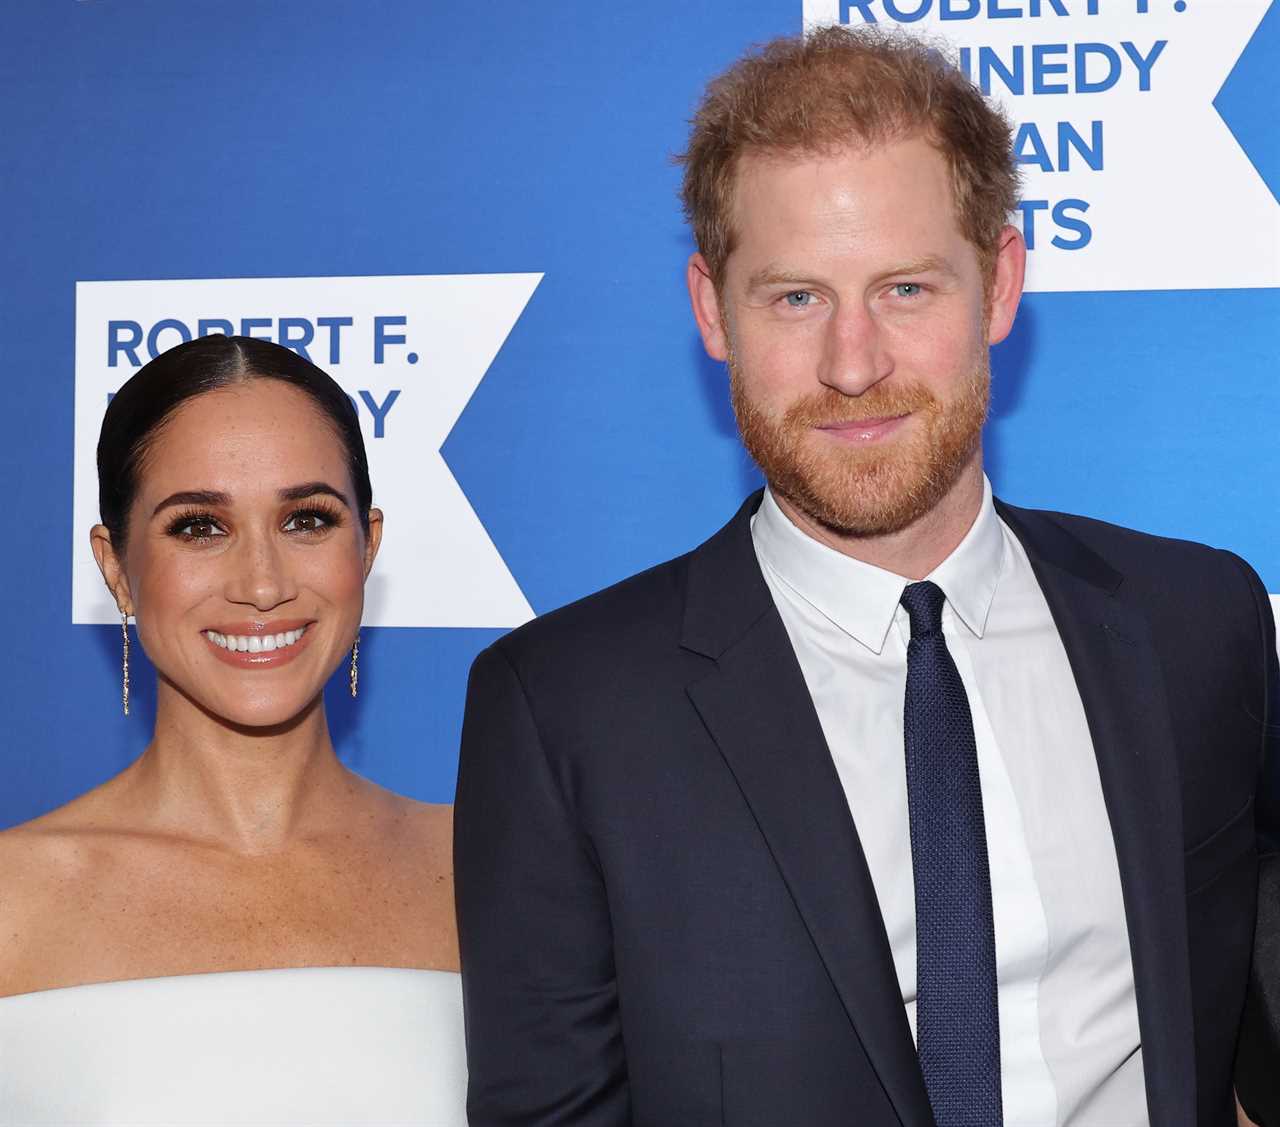 Prince Harry & Meghan Markle’s ‘plans for another Netflix series’ revealed by insider – and it’ll be ‘heavily scripted’